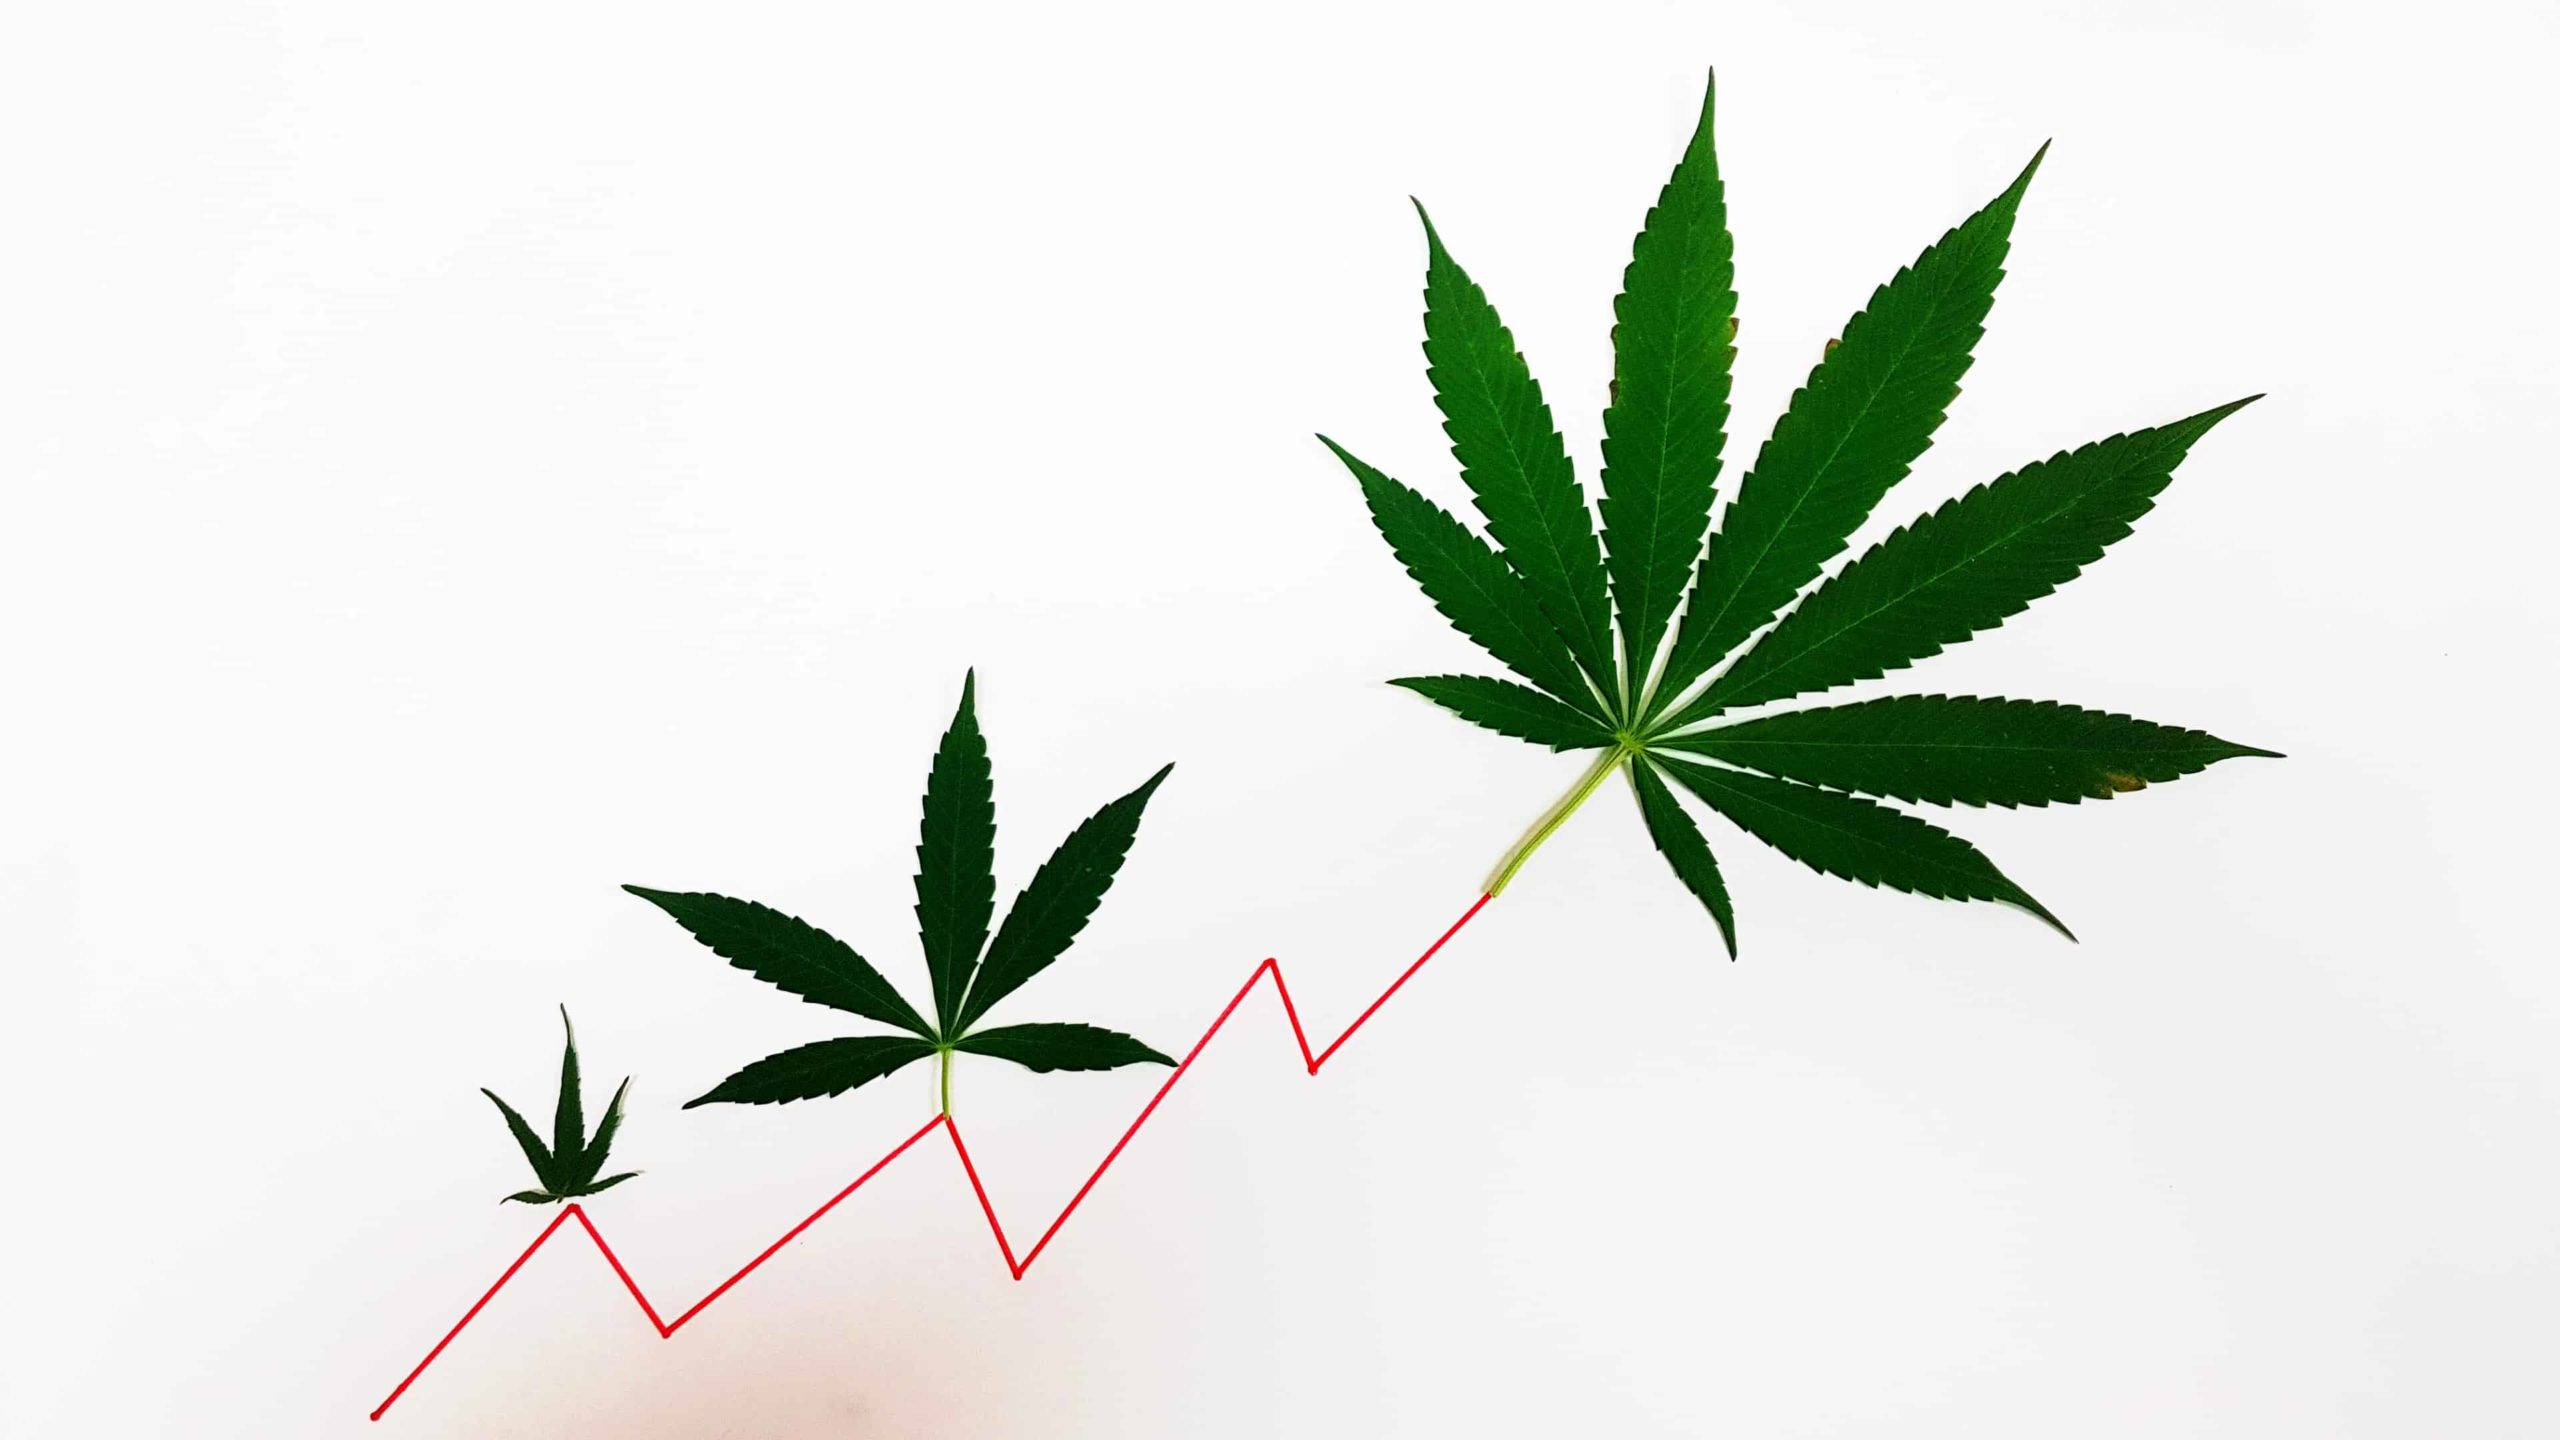 cannabis leaves on a rising line graph representing growth of ASX cannabis shares